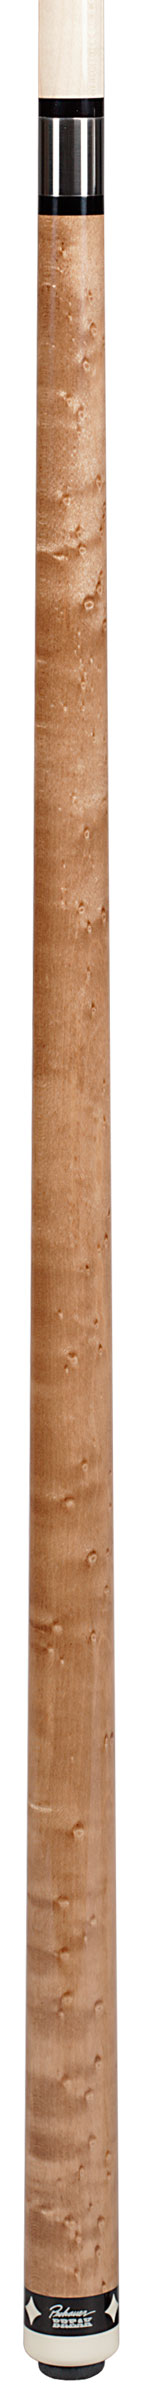 Pechauer BREAK Cue Natural Stained